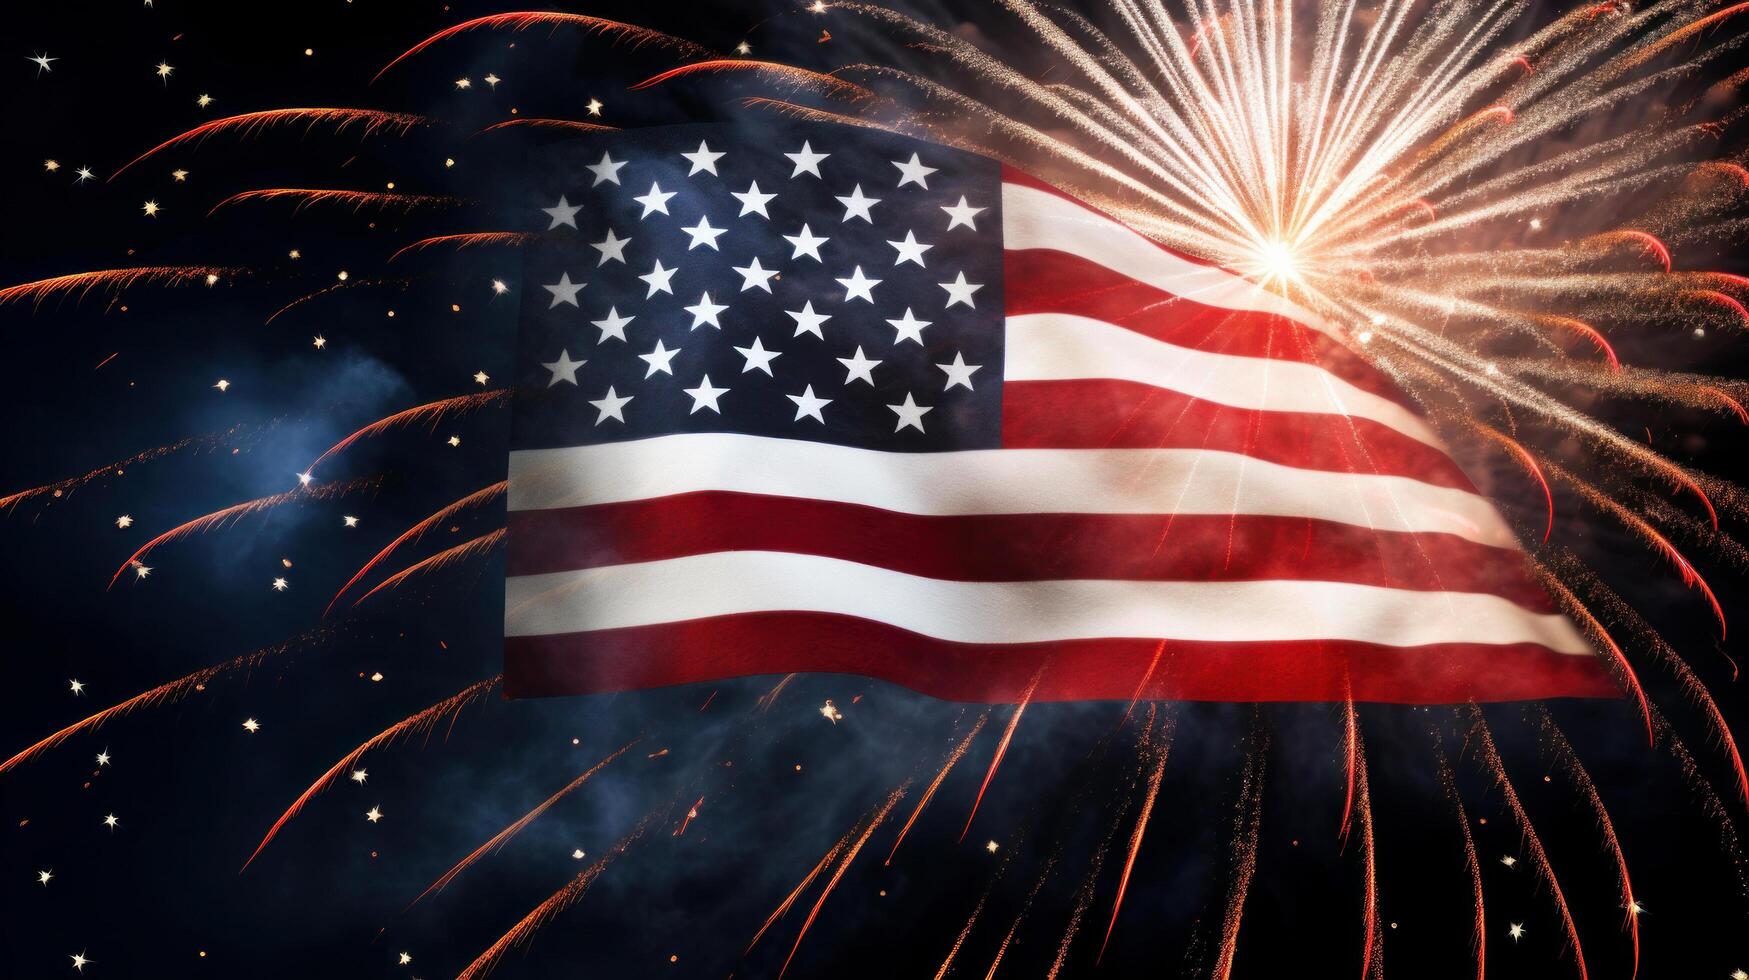 USA Holiday background with flag and fireworks. Illustration photo